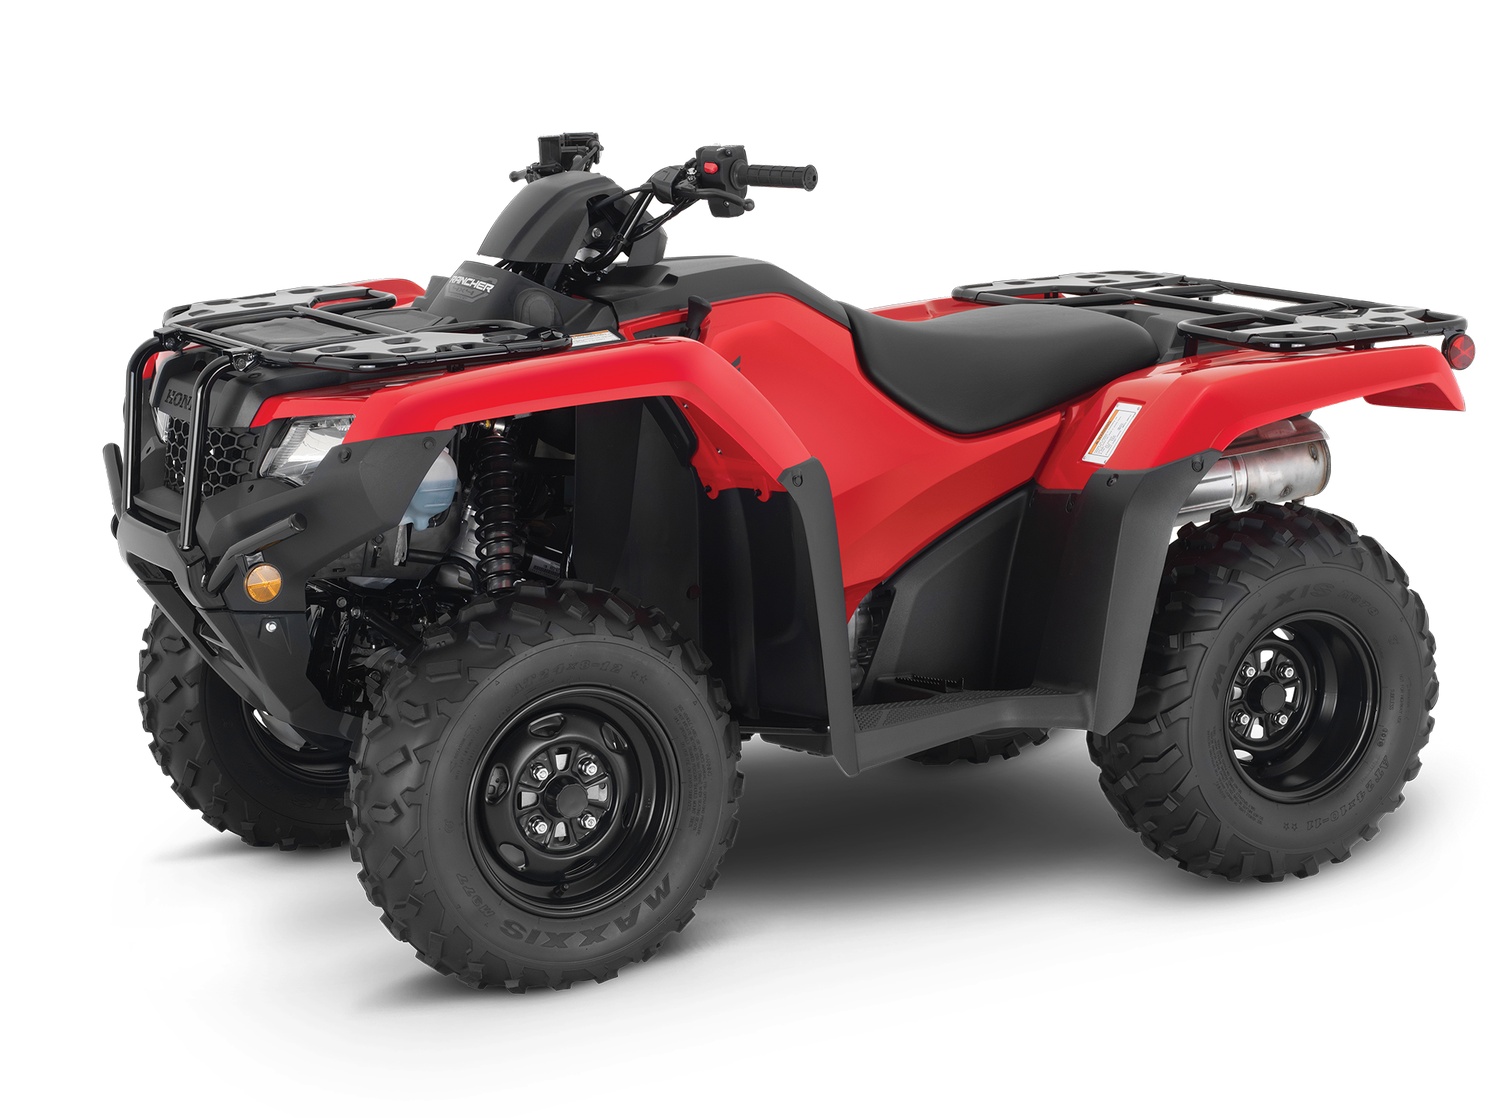 Honda TRX420 RANCHER 2023 - PRE-ORDER YOURS NOW!!